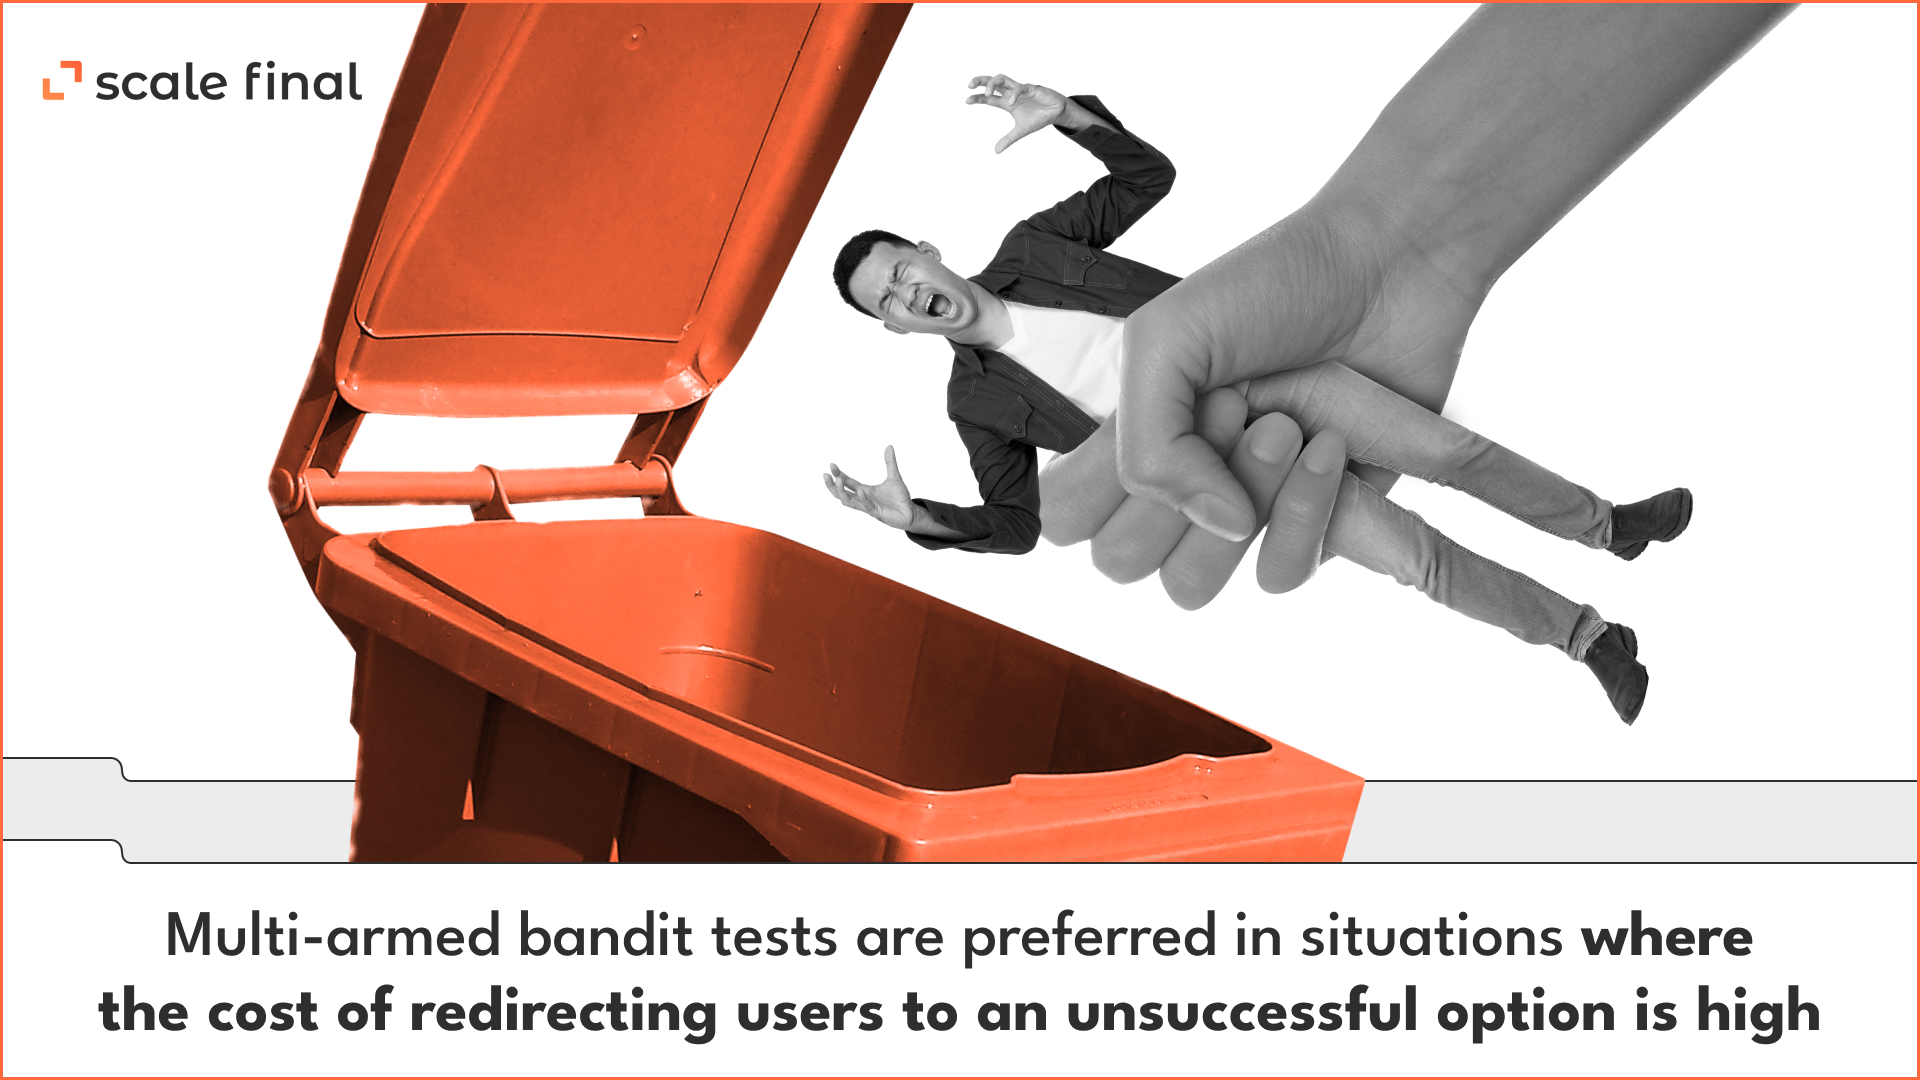 Multi-armed bandit tests are preferred in situations where the cost of redirecting users to an unsuccessful option is high.